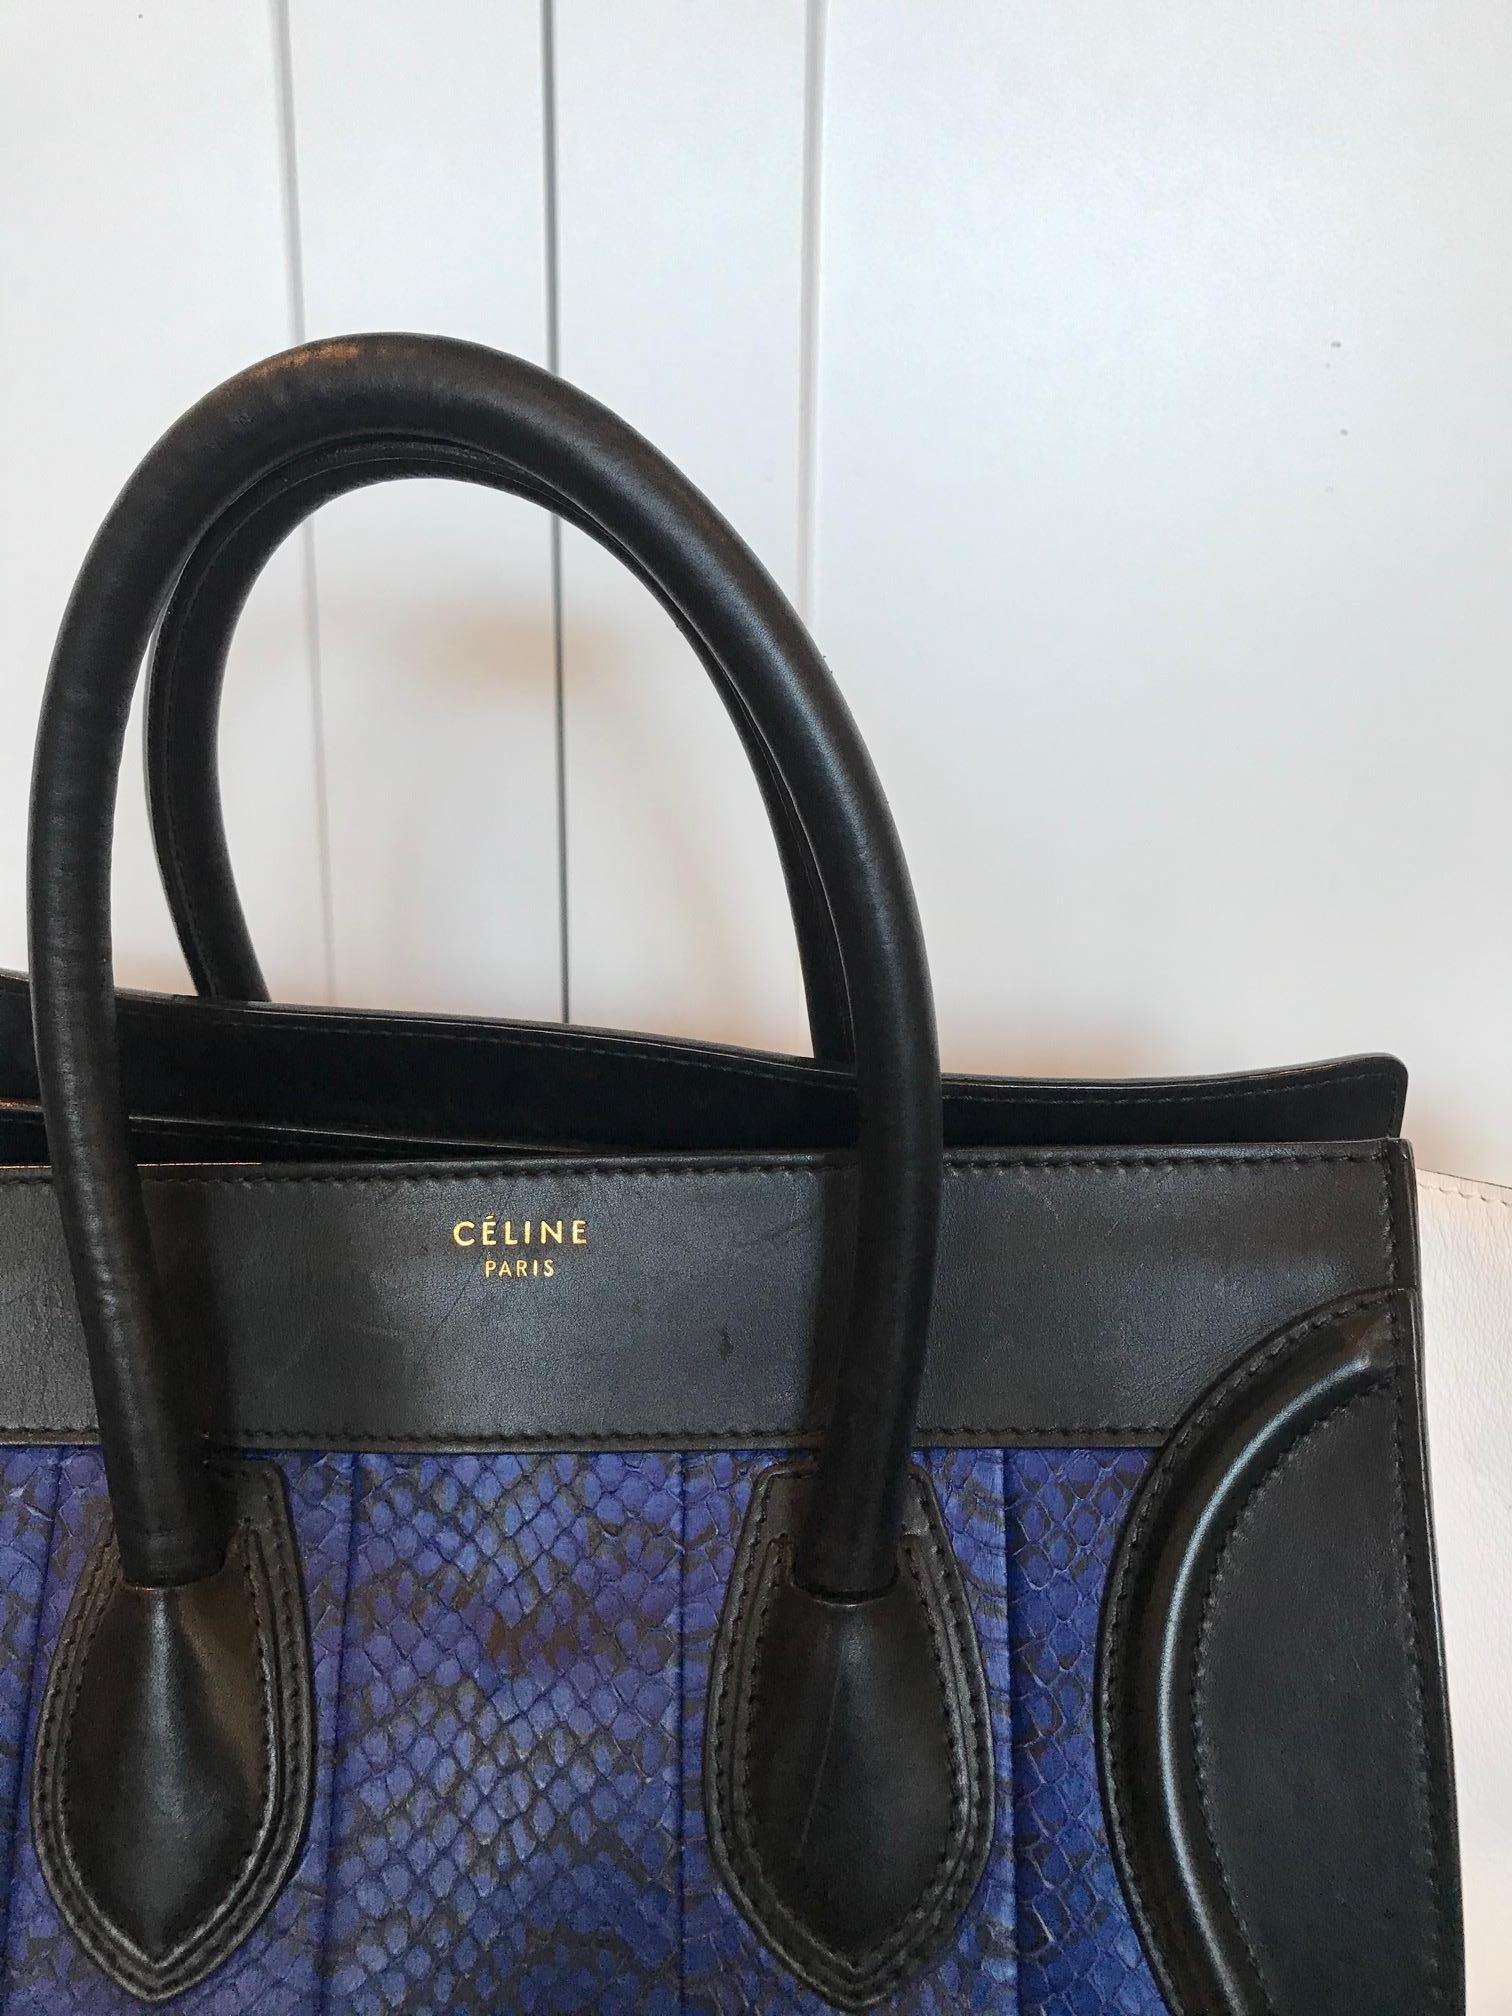 Royal blue leather and black and white skin. Featuring black double top handles. Silver-tone hardware. The bottom comes secured with silver-tone studs. The exterior has a zipper pocket at the front. The top zipper closure opens to an accommodating